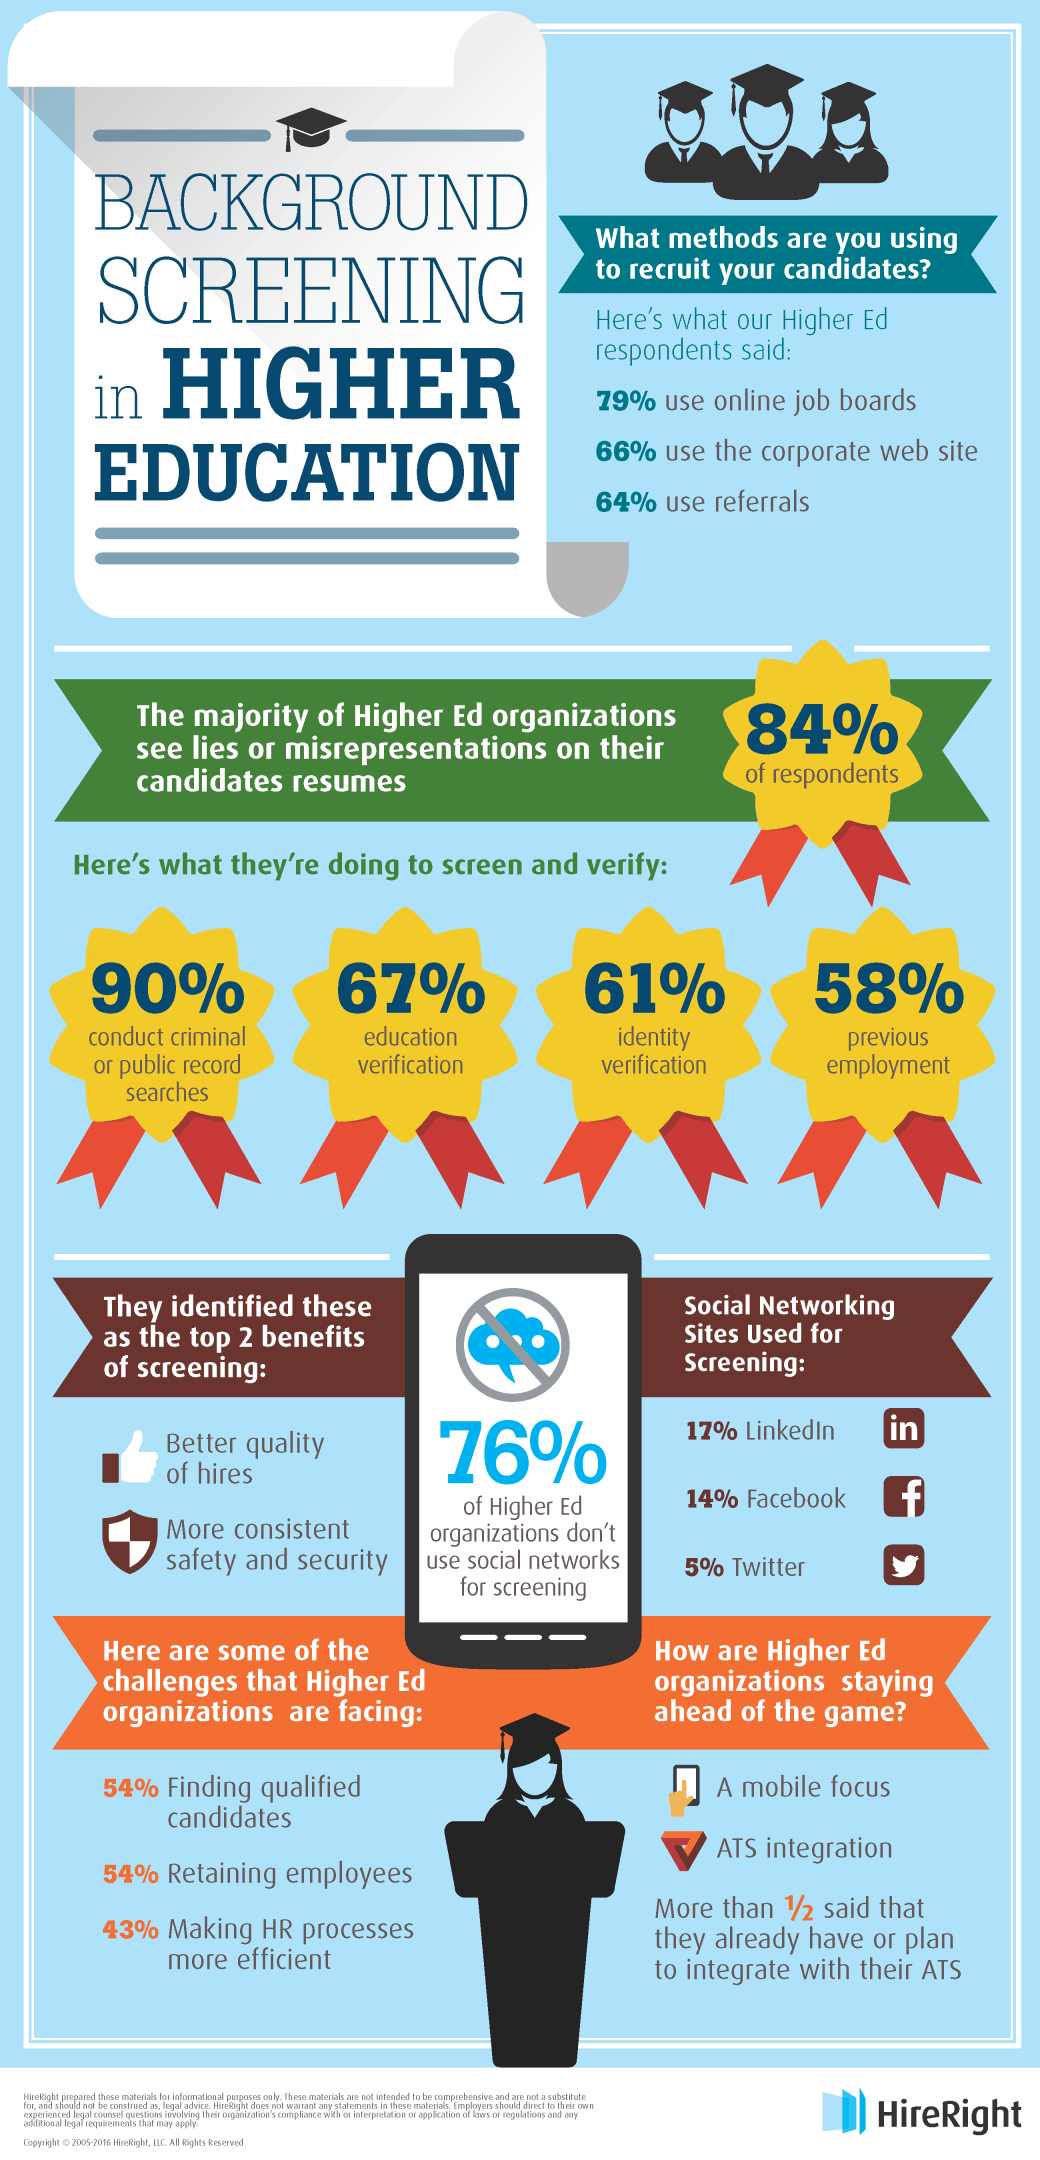 Background Screening in the Higher Education Industry Infographic